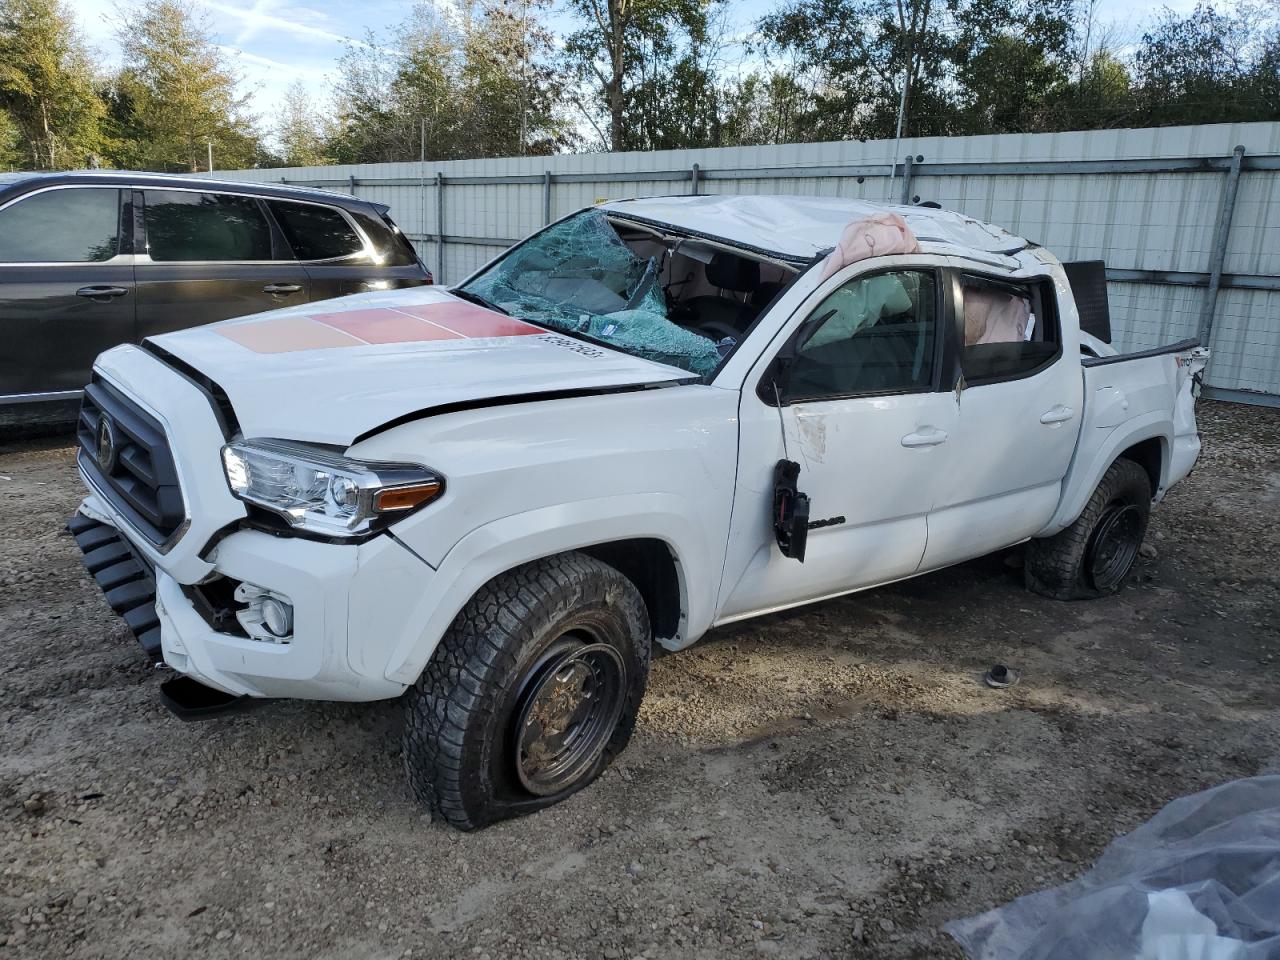 vin: 5TFCZ5AN2MX271214 5TFCZ5AN2MX271214 2021 toyota tacoma 3500 for Sale in 32343 6677, Fl - Tallahassee, Midway, USA